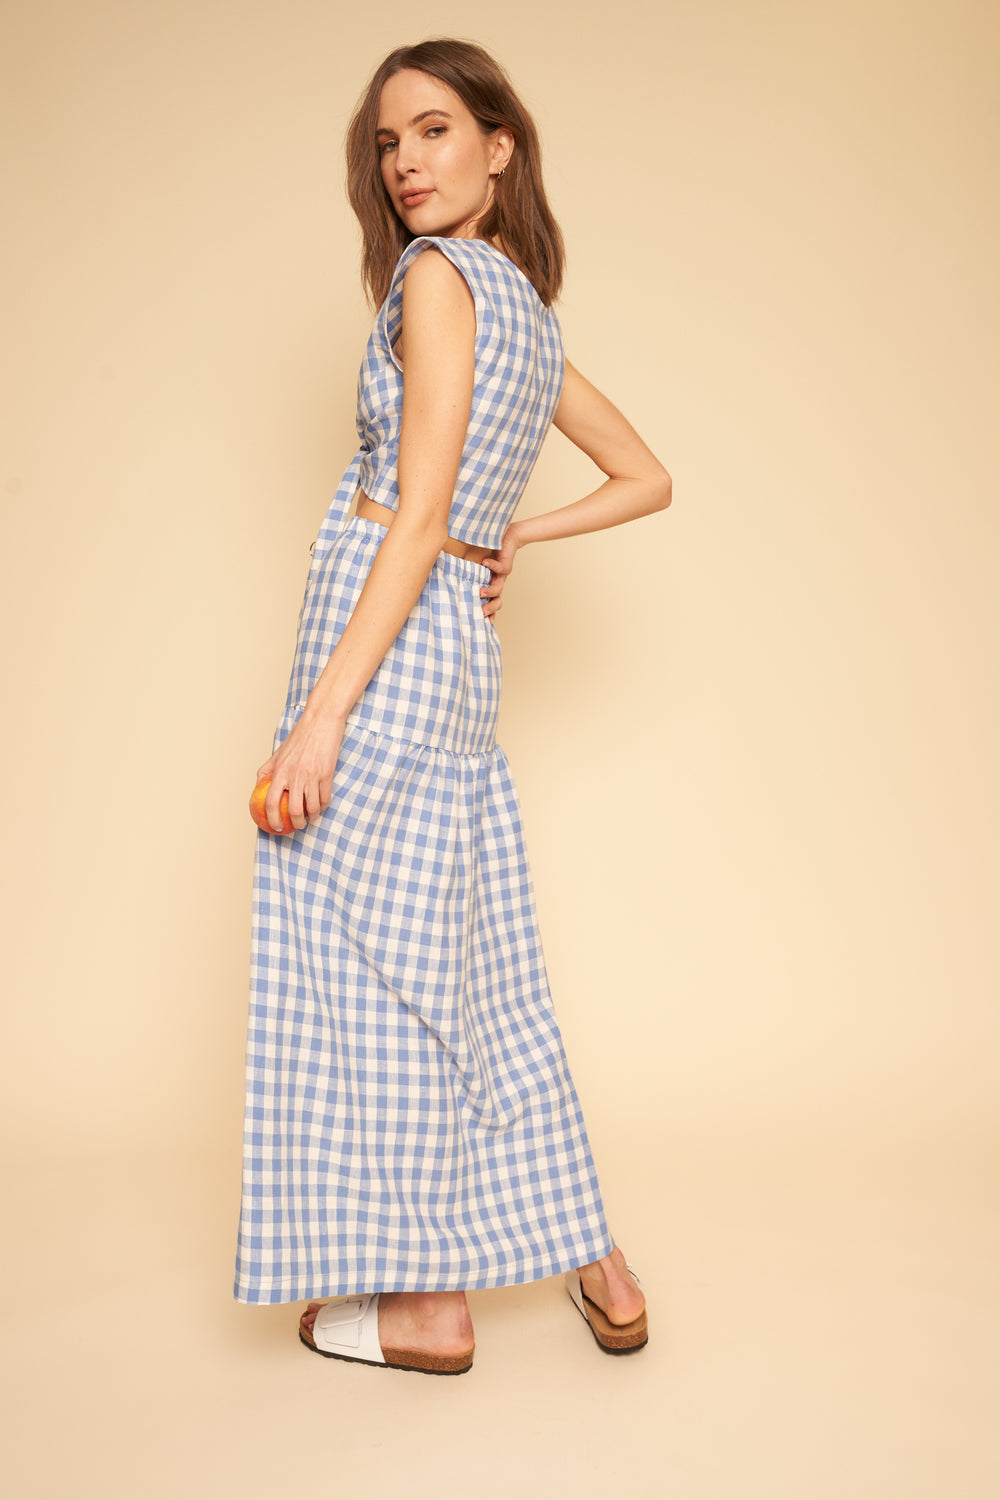 Valentina Top in Blue Gingham Linen - Whimsy & Row